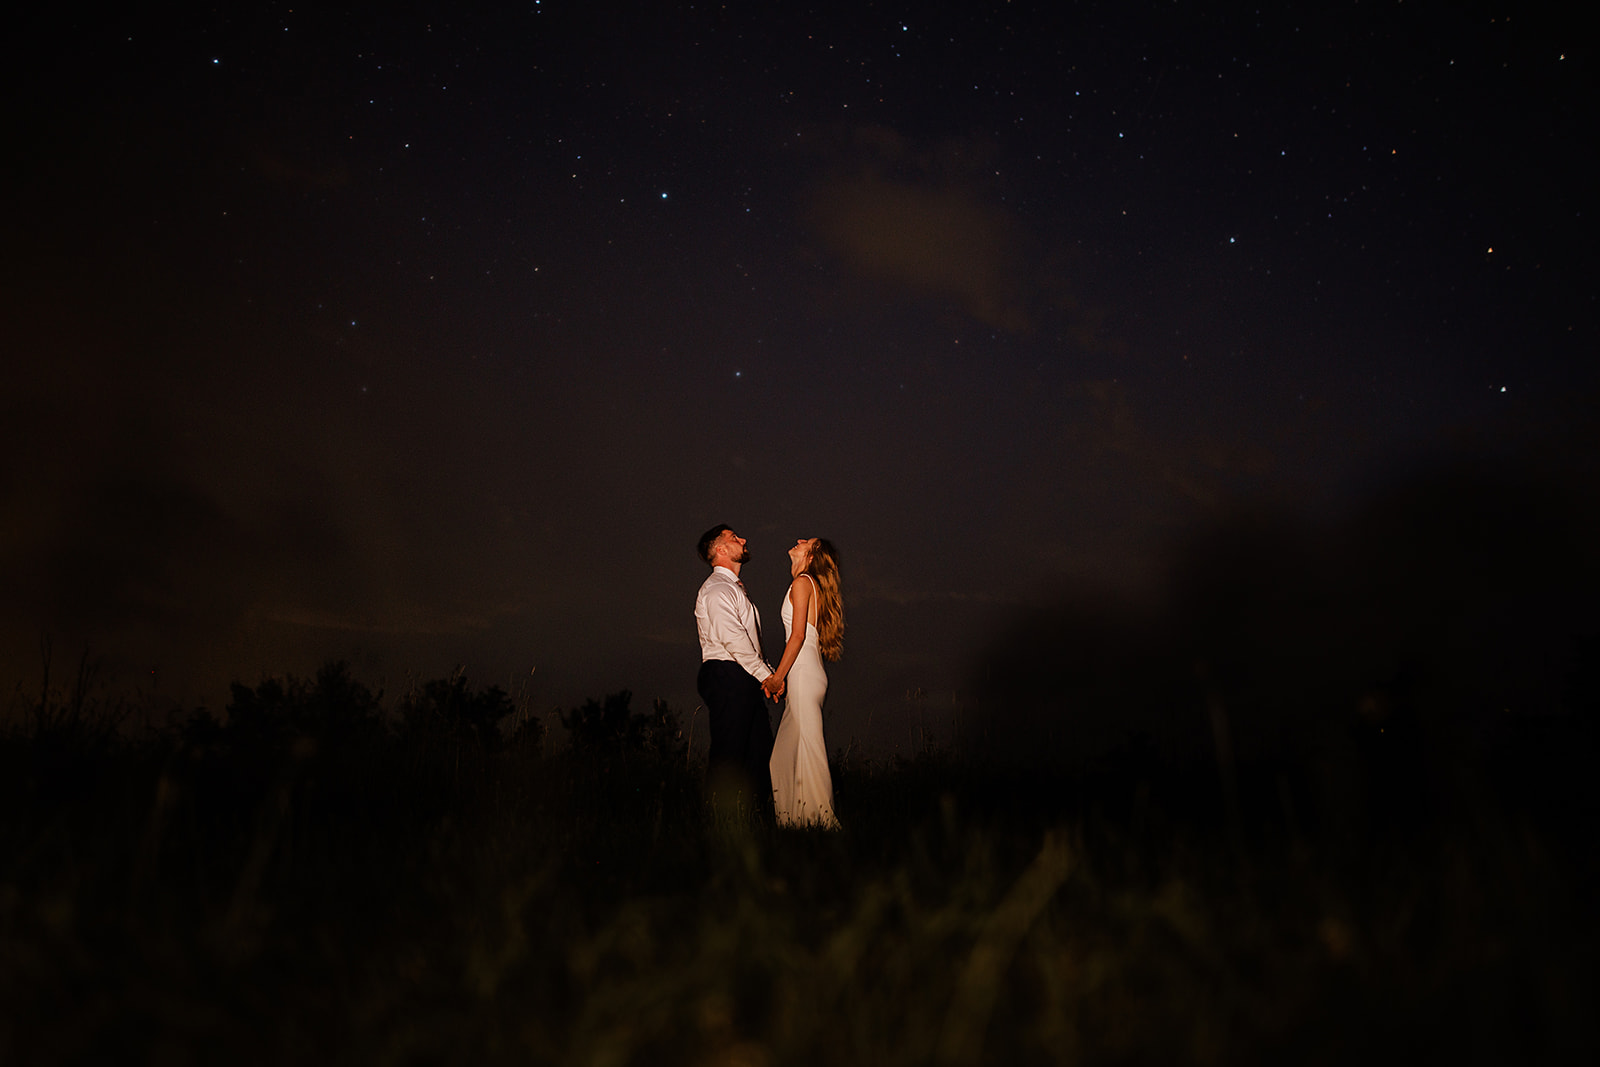 Bride and Groom stand in Catskill field and look up at star filled night sky for a creative portrait on wedding night.